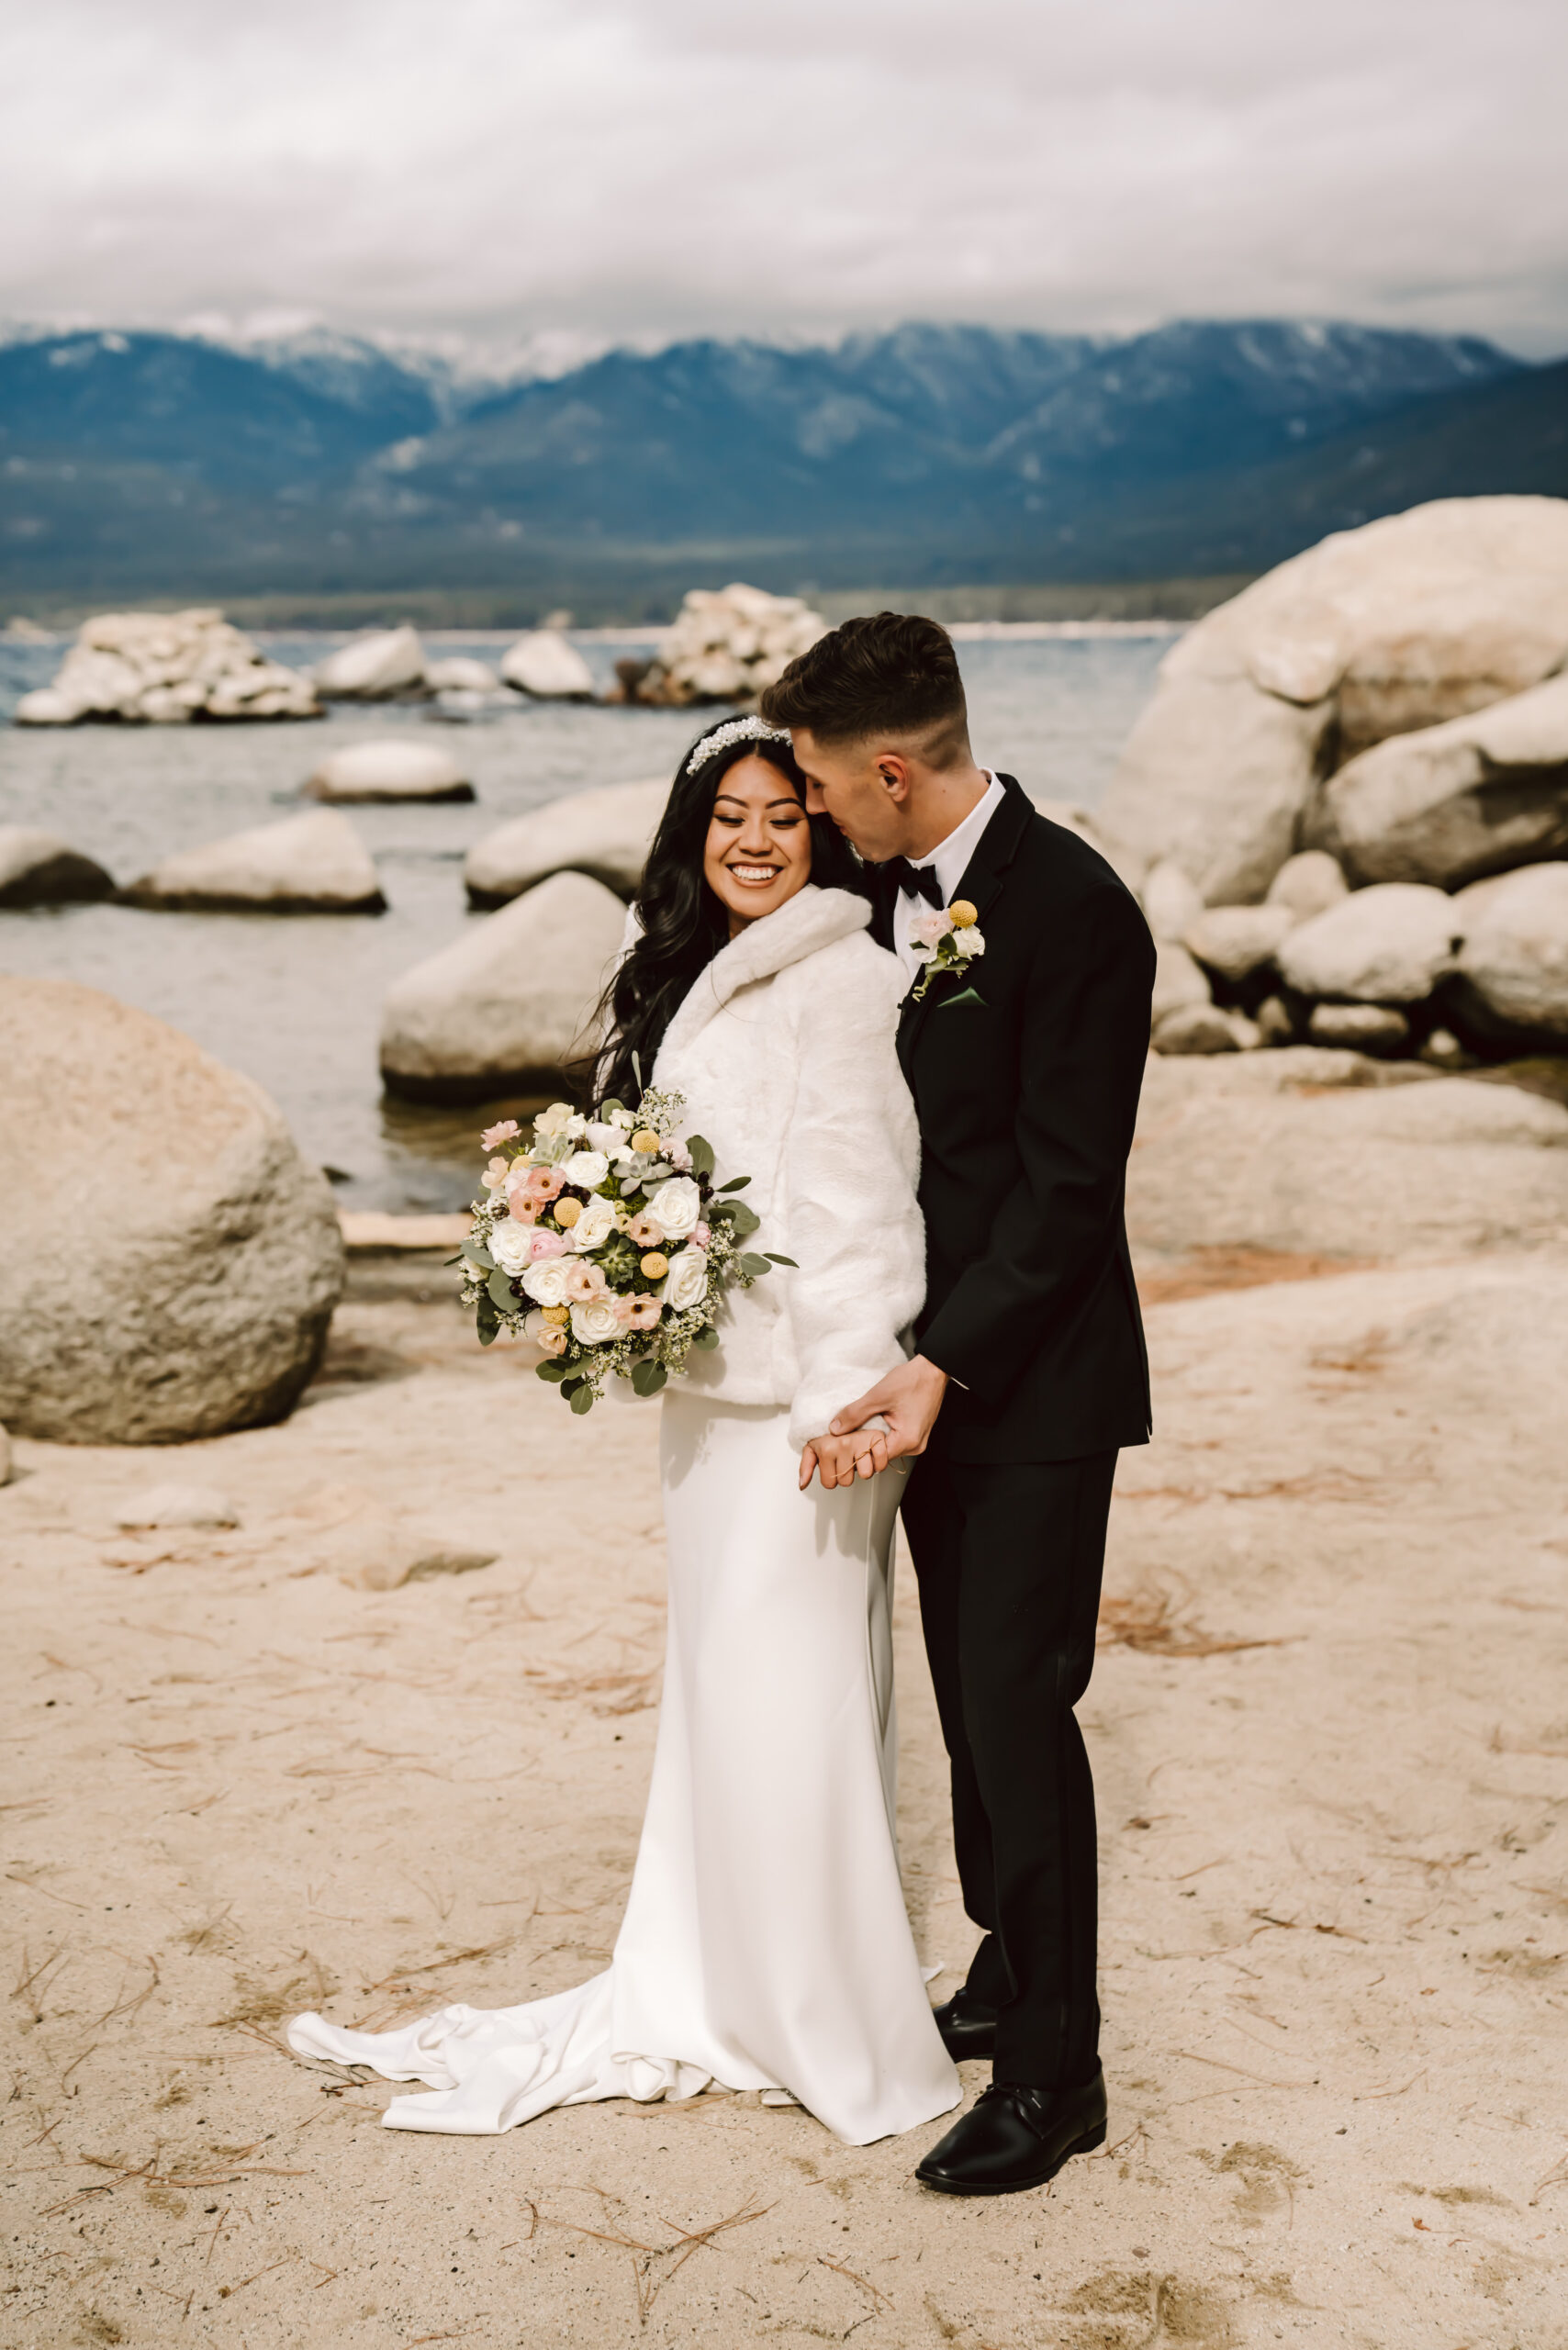 A groom kissing his bride on the beach of Sand Harbor with the mountains in the backdrop for a winter Elopement in Lake Tahoe